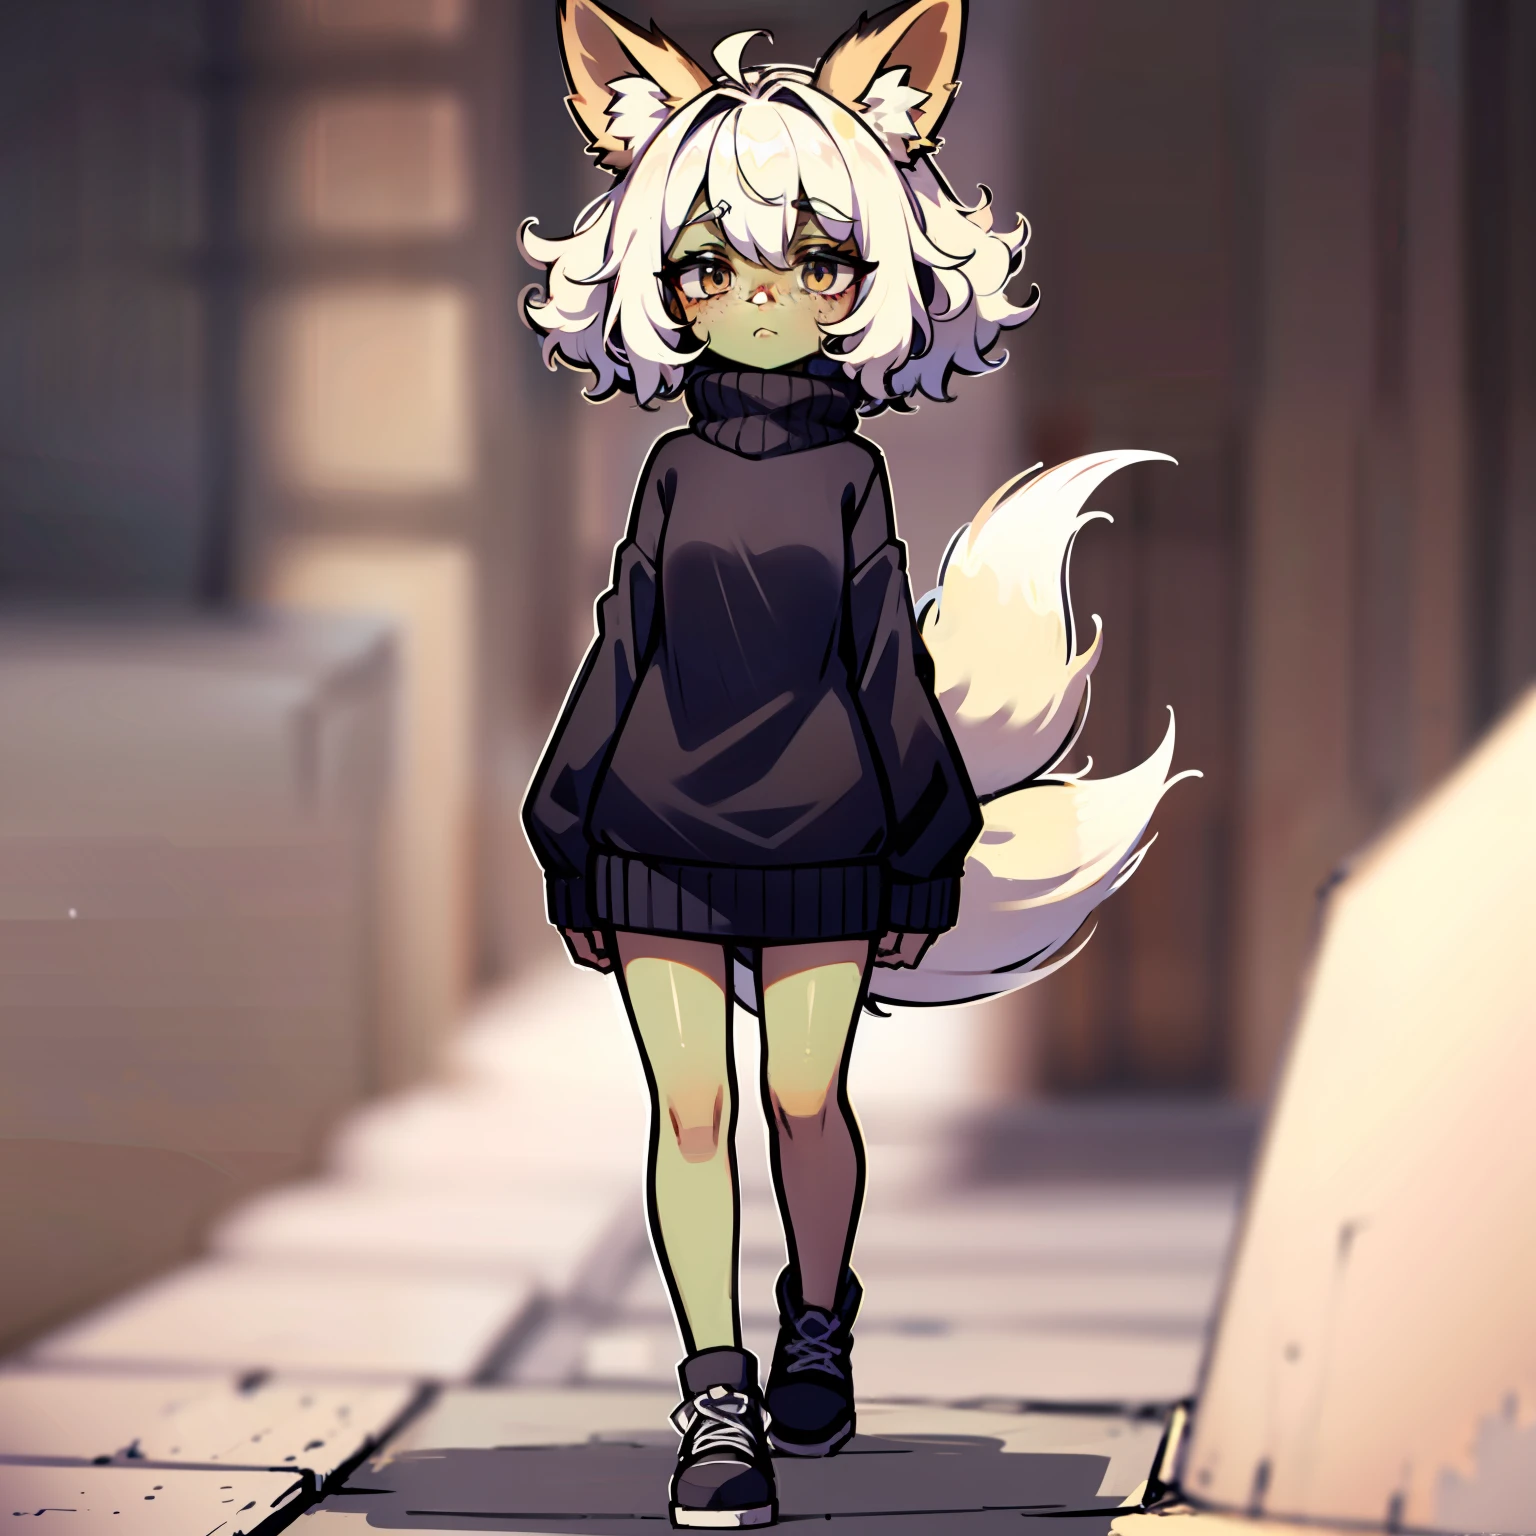 1woman with freckles, white hair, beautiful minimalist design freckles, freckles, fox ears and tail, dark skin, curly white hair, very curly, black eyes, black eye, shy look, short curly hair, full body, cute, oversized sweater full of soft colors, cute skirt, cute shoes, ultra resolution, brown skin, minimalist, brown skin, fox tail, fox ears